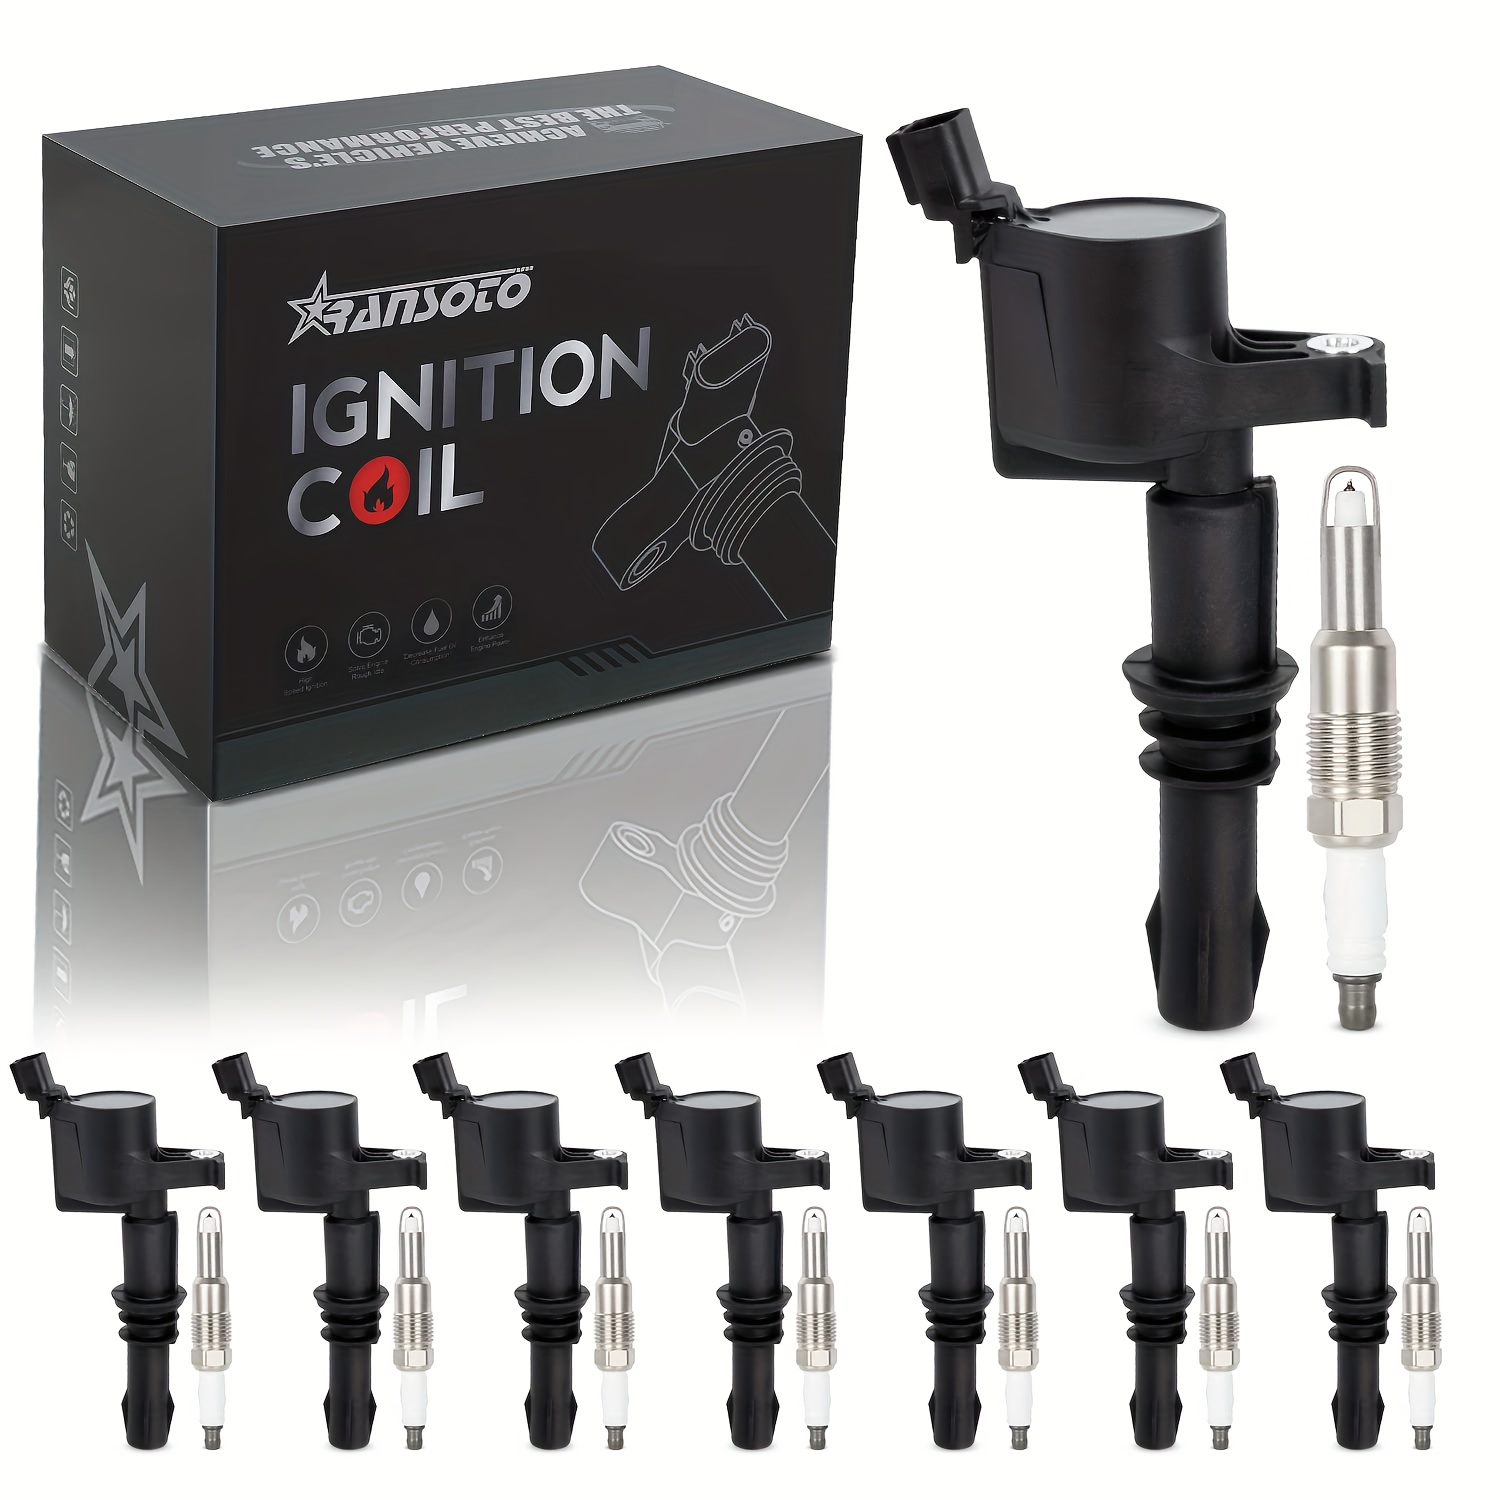 

Ransoto Dg511 Ignition Coil Pack With Spark Plug Sp546 Sp515 Compatible With 5.4l Ford Expedition F-150 F-250 F-350 Super Duty Navigator Mark Lt